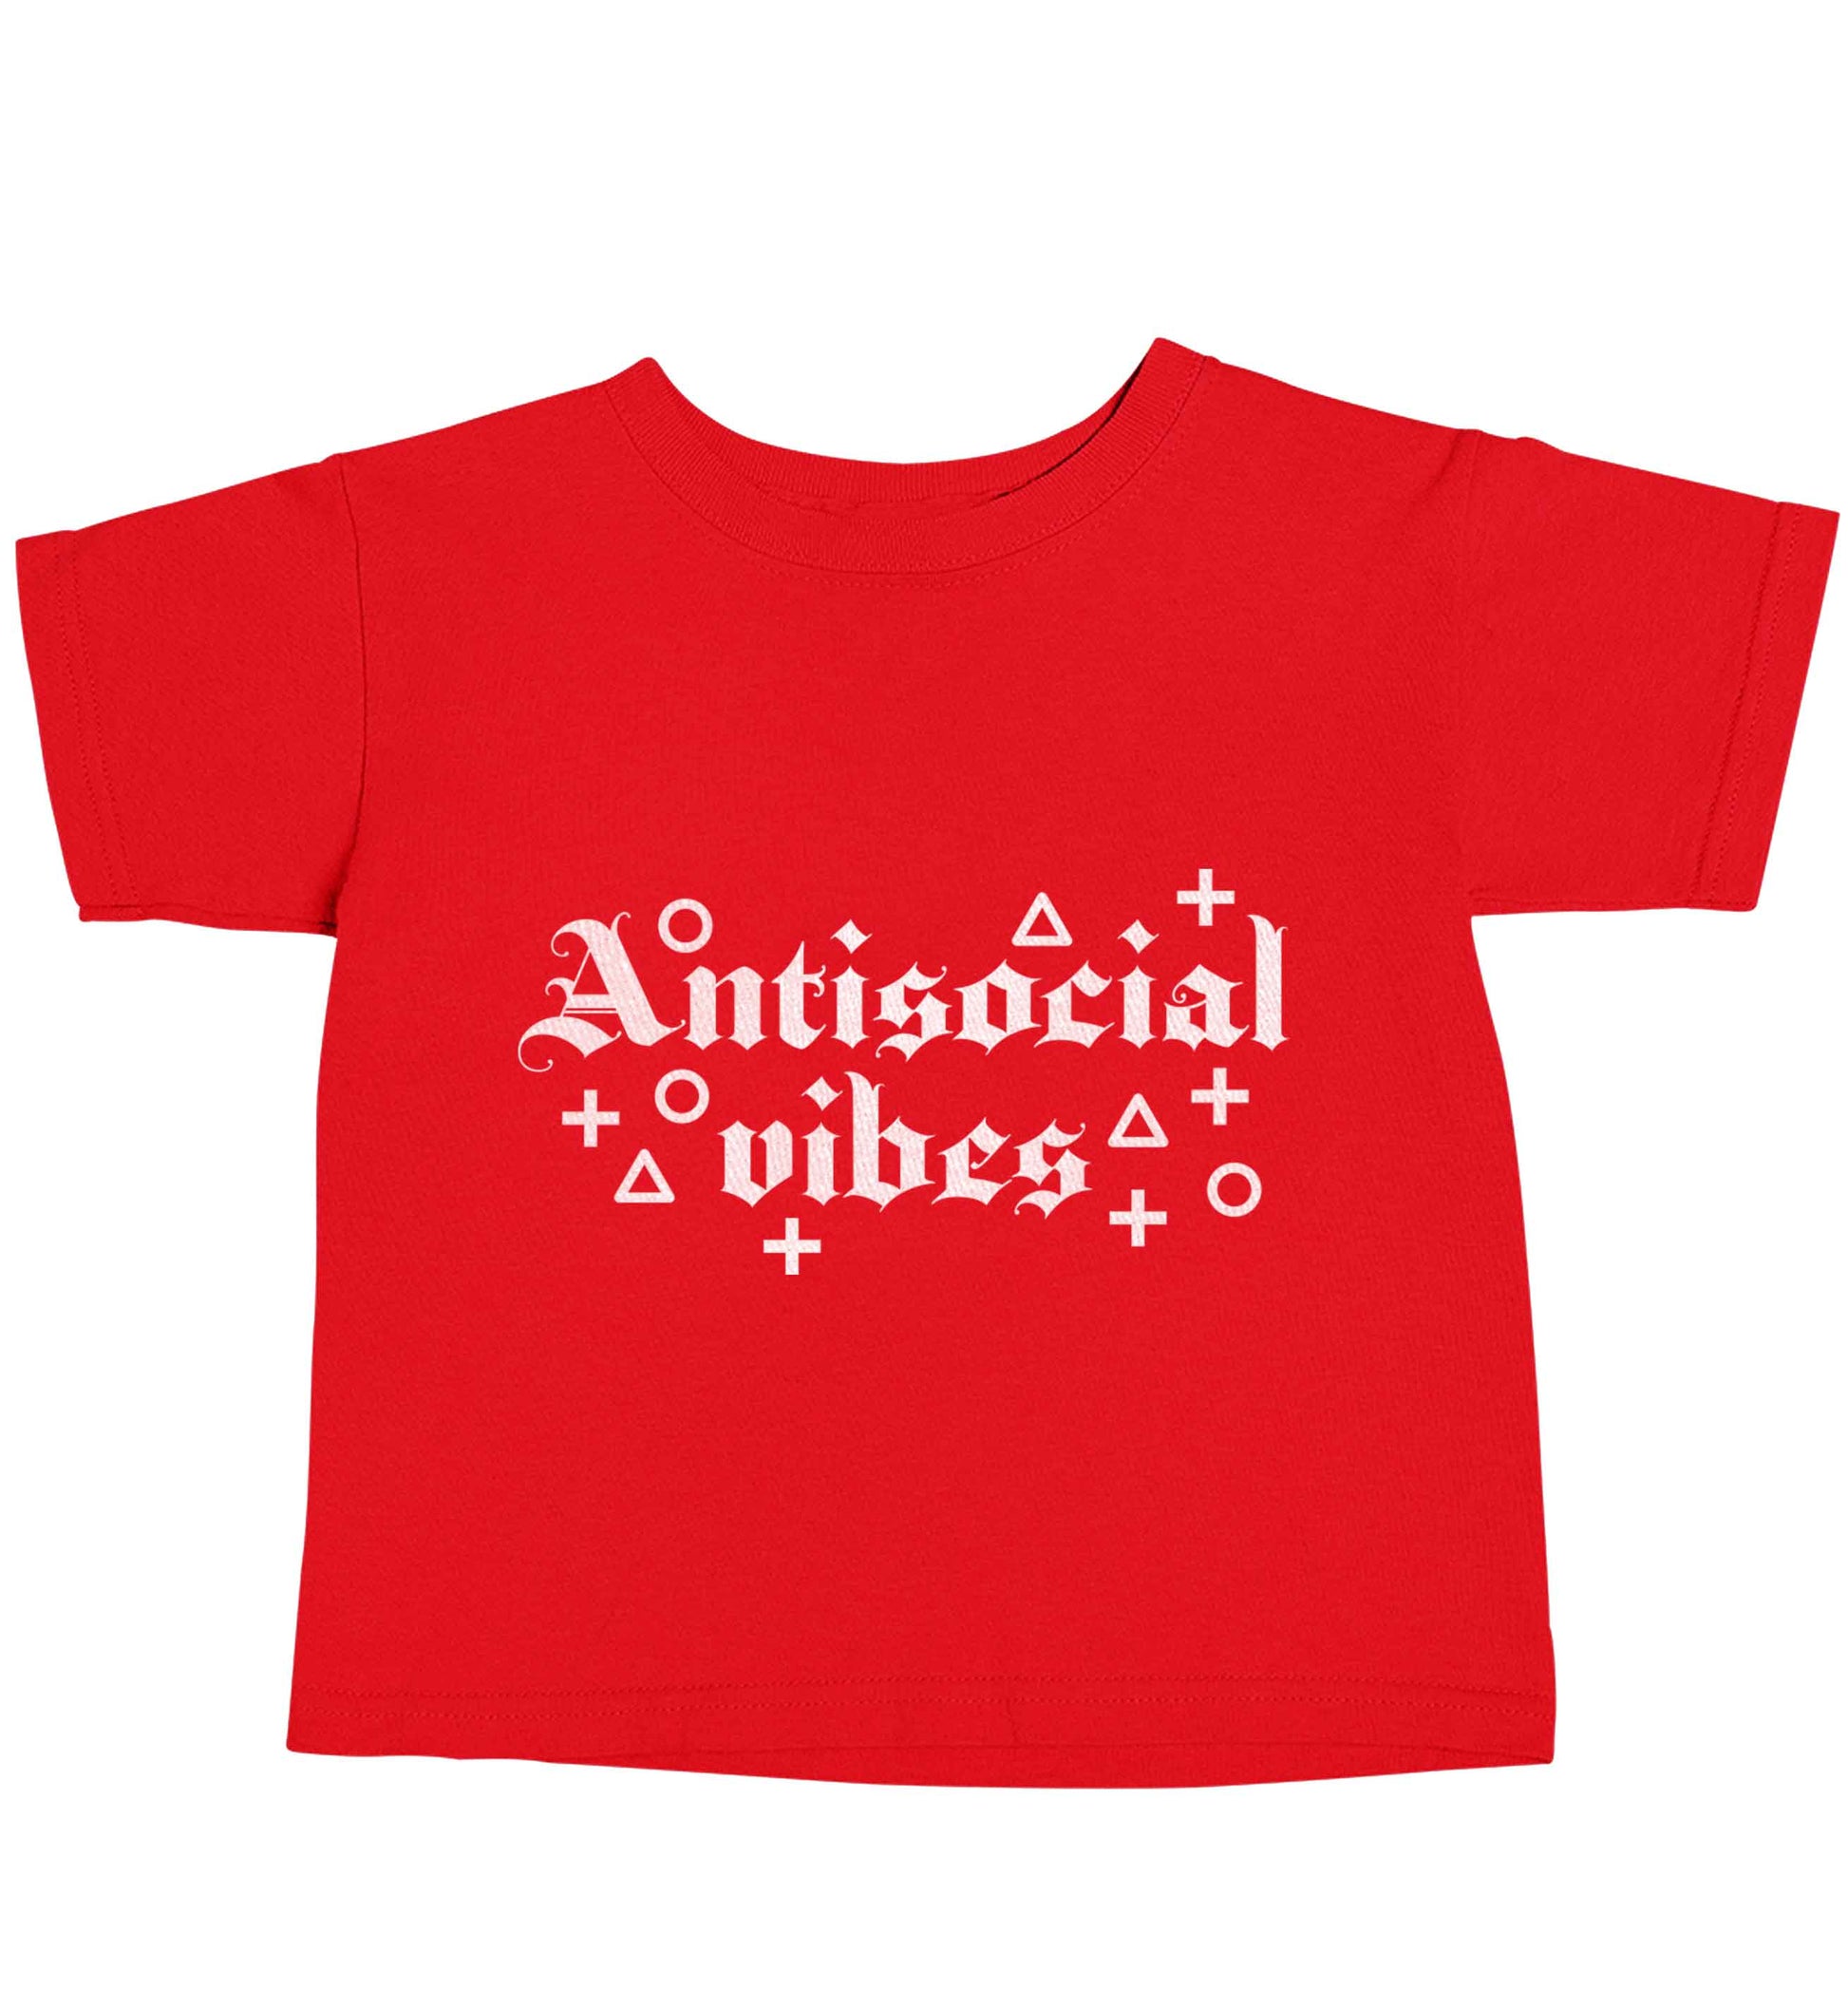 Antisocial vibes red baby toddler Tshirt 2 Years